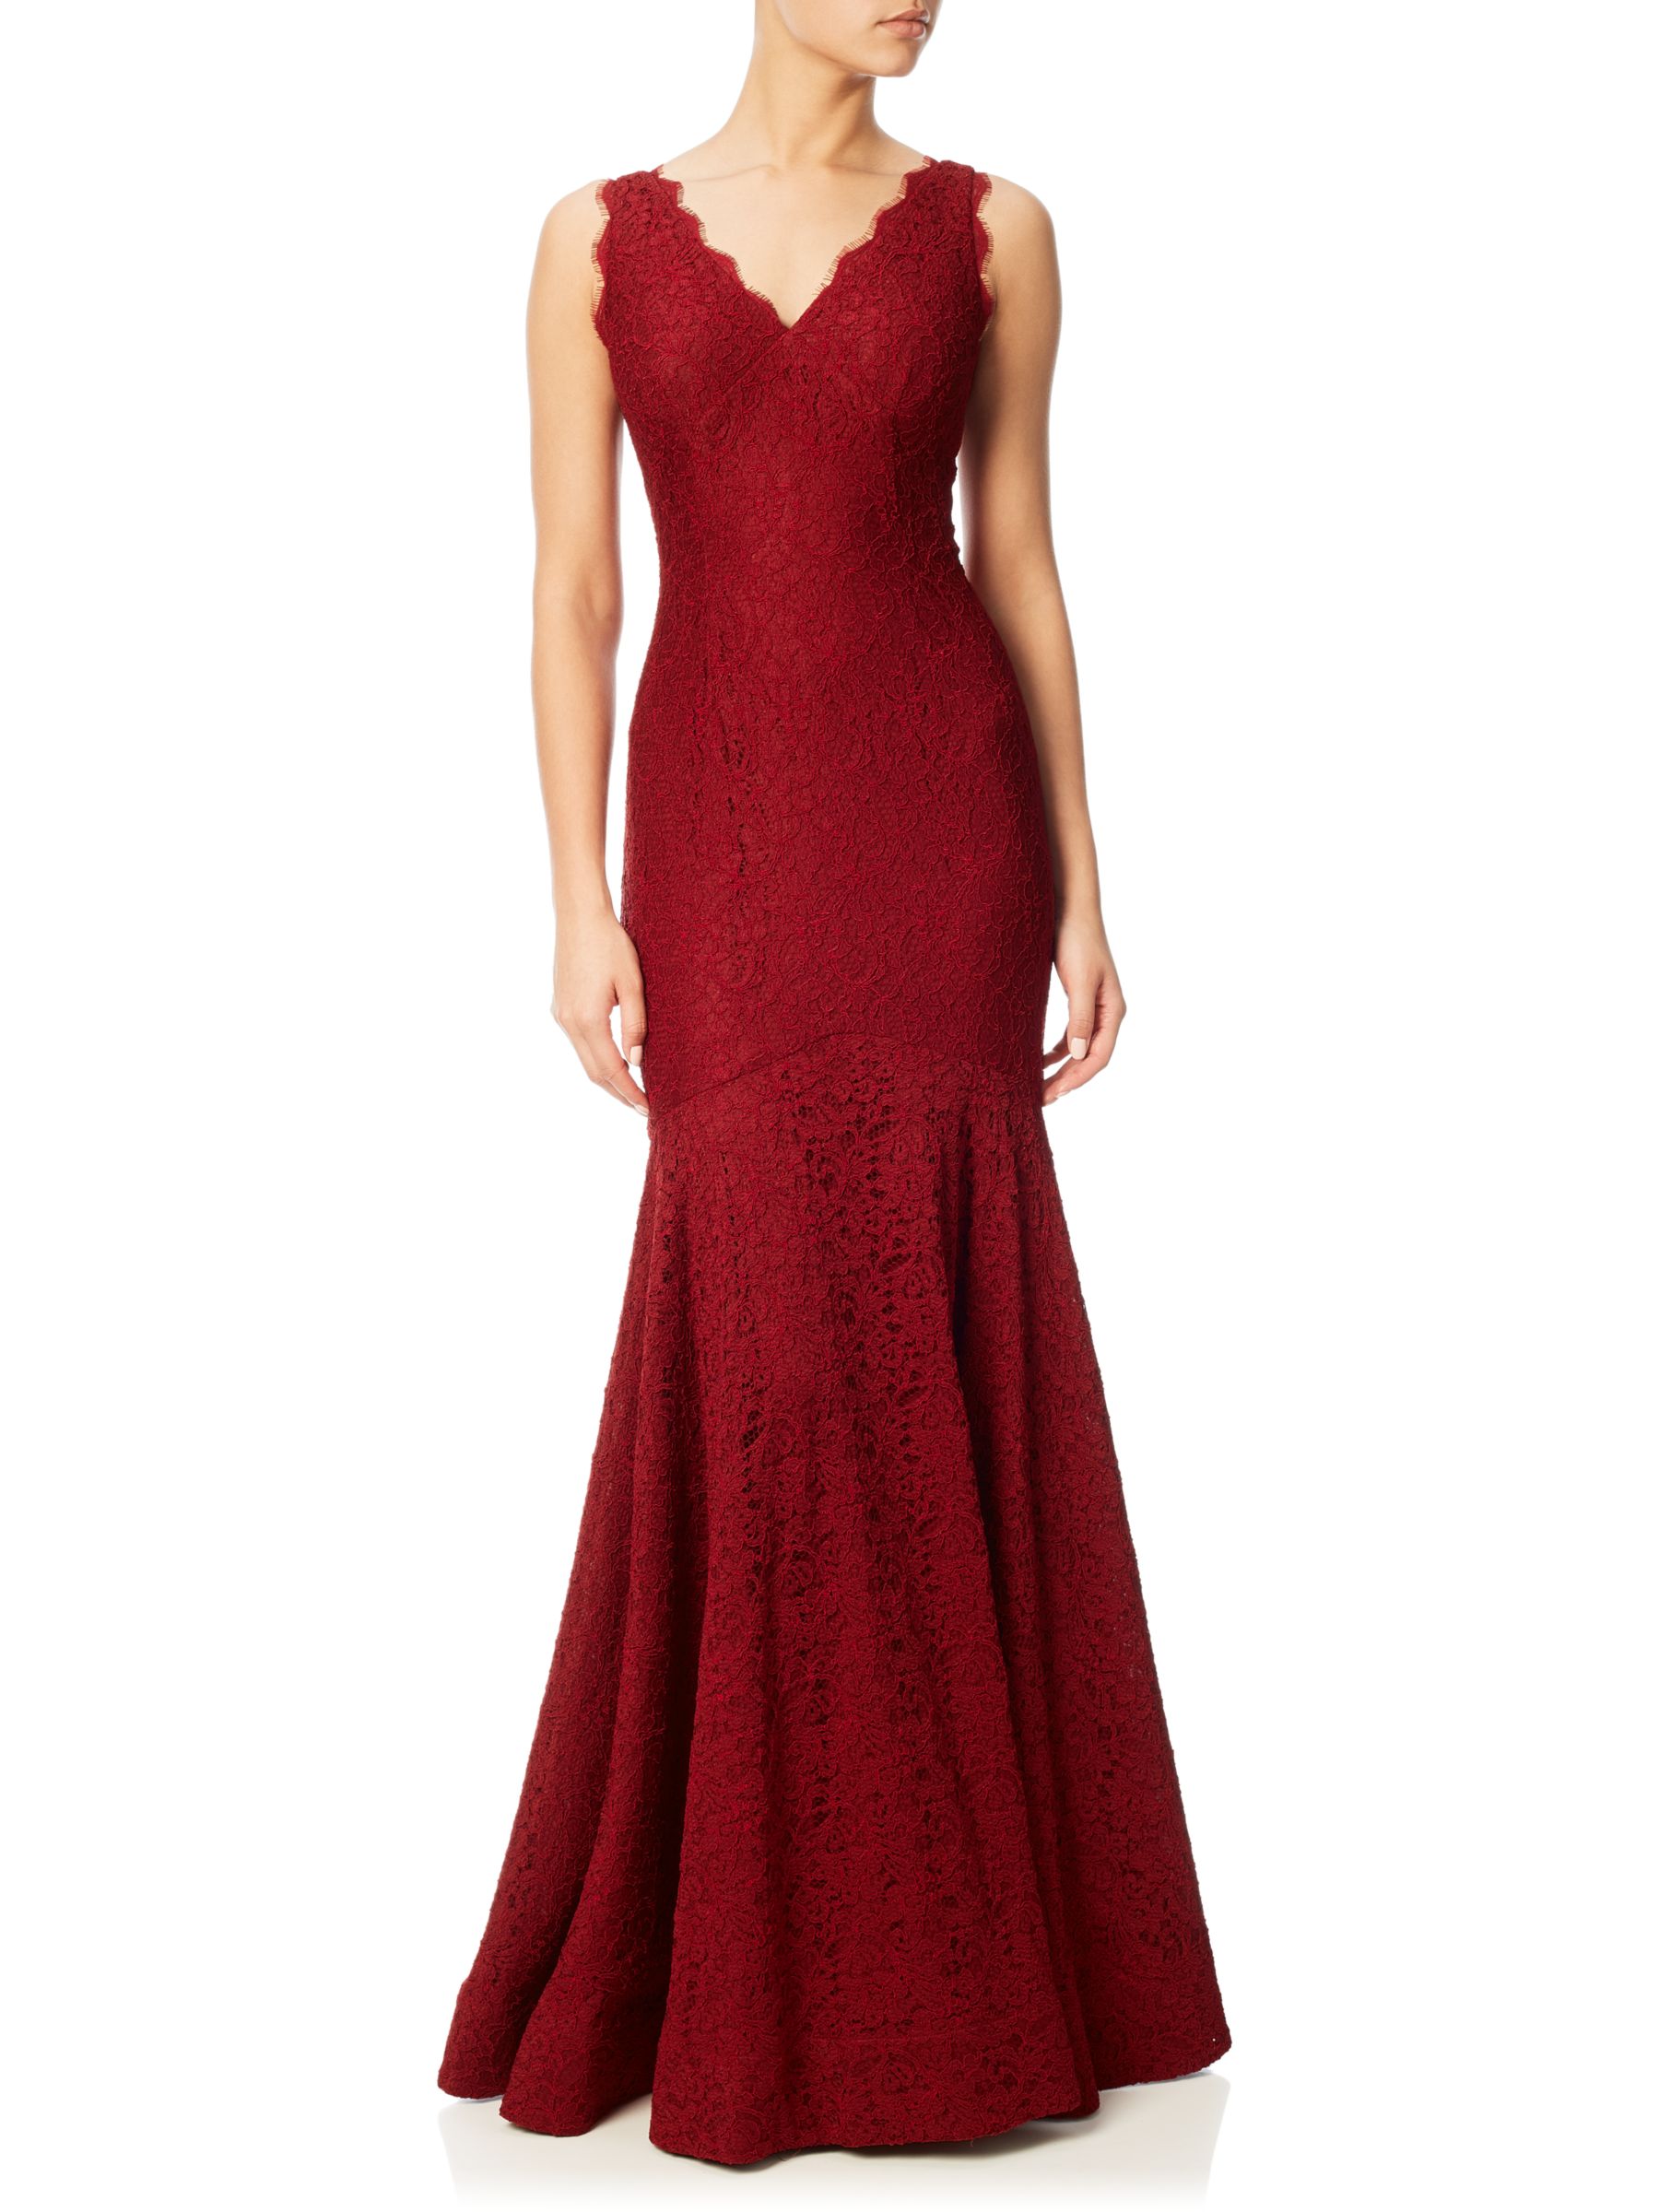 Adrianna Papell Sleeveless V-Neck Lace Trumpet Gown, Crimson